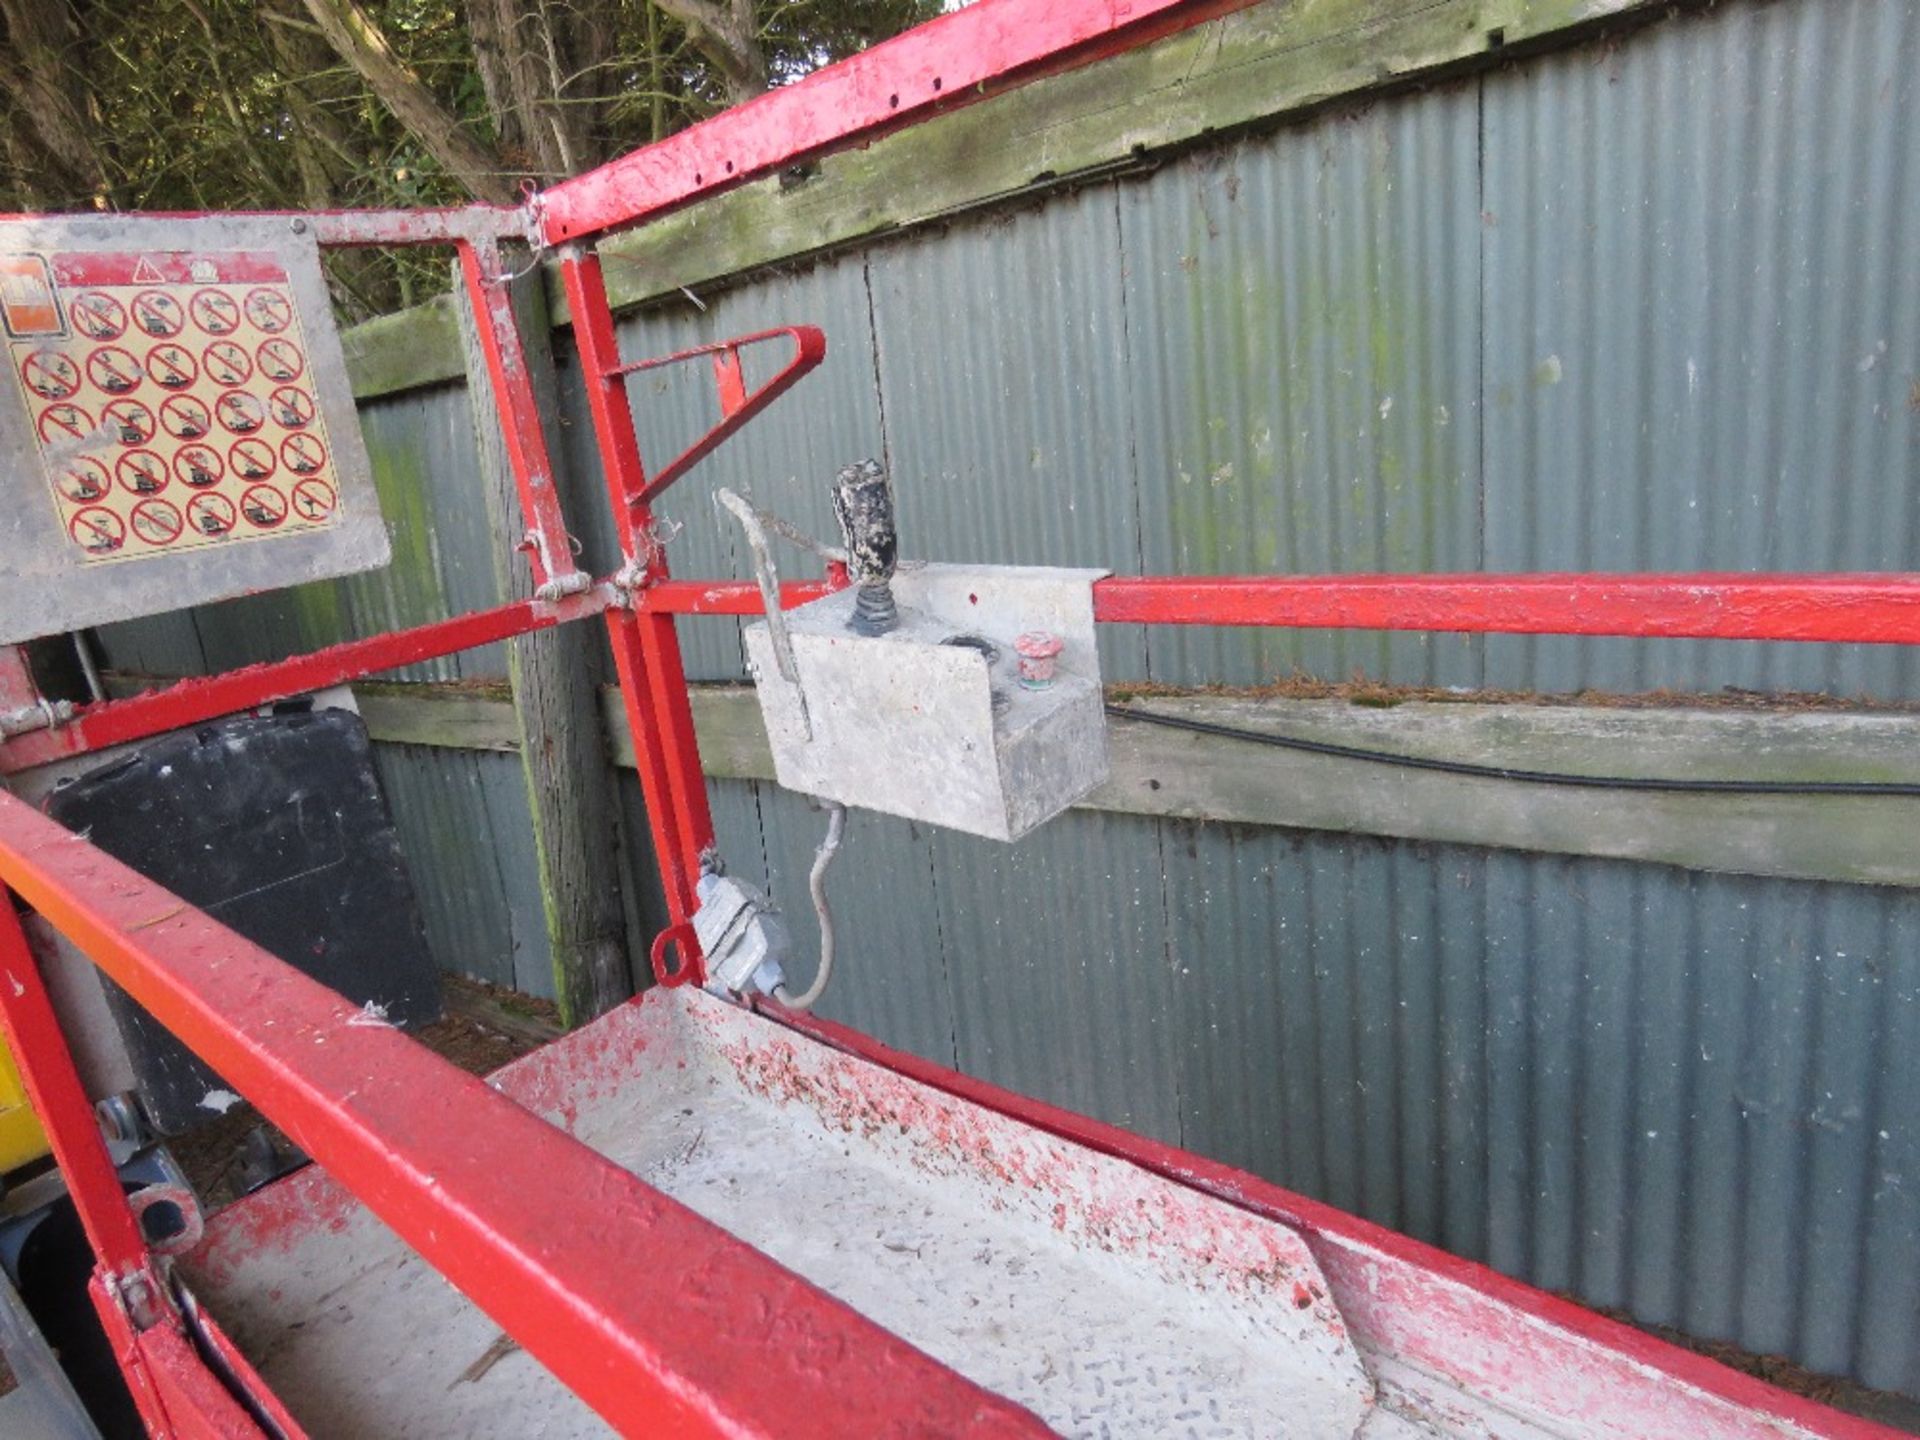 SKYJACK 3219 SCISSOR LIFT ACCESS PLATFORM, YEAR 2010. SN:22020000. UNTESTED, BATTERY FLAT WHEN DELIV - Image 2 of 6